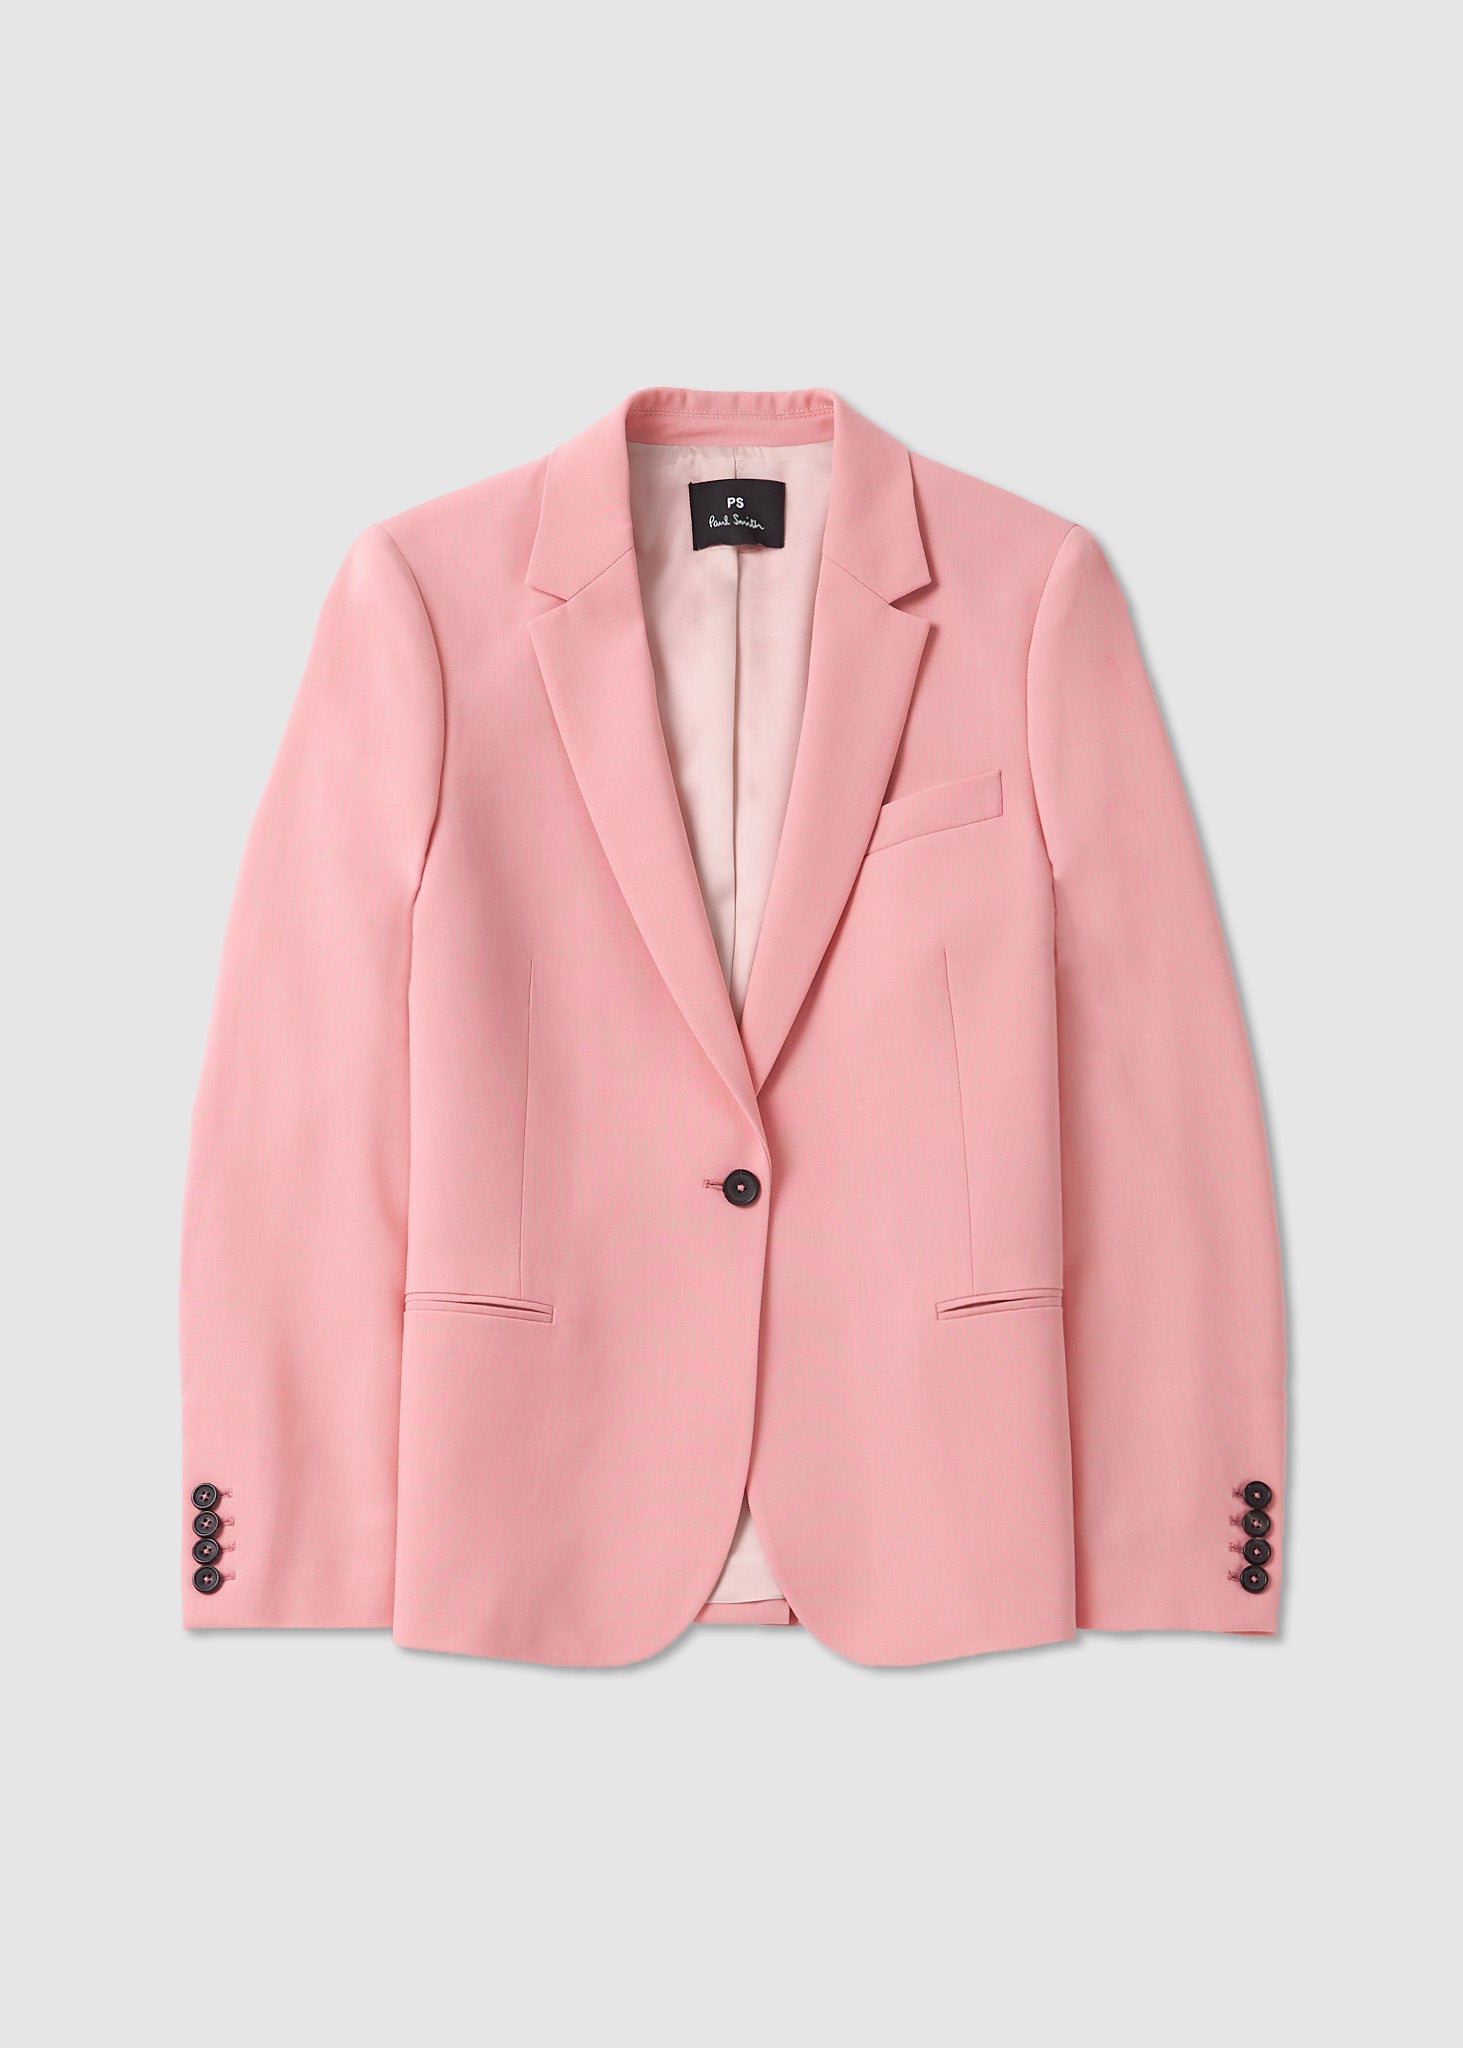 Image of Ps Paul Smith Womens Single Breasted Wool Blazer In Powder